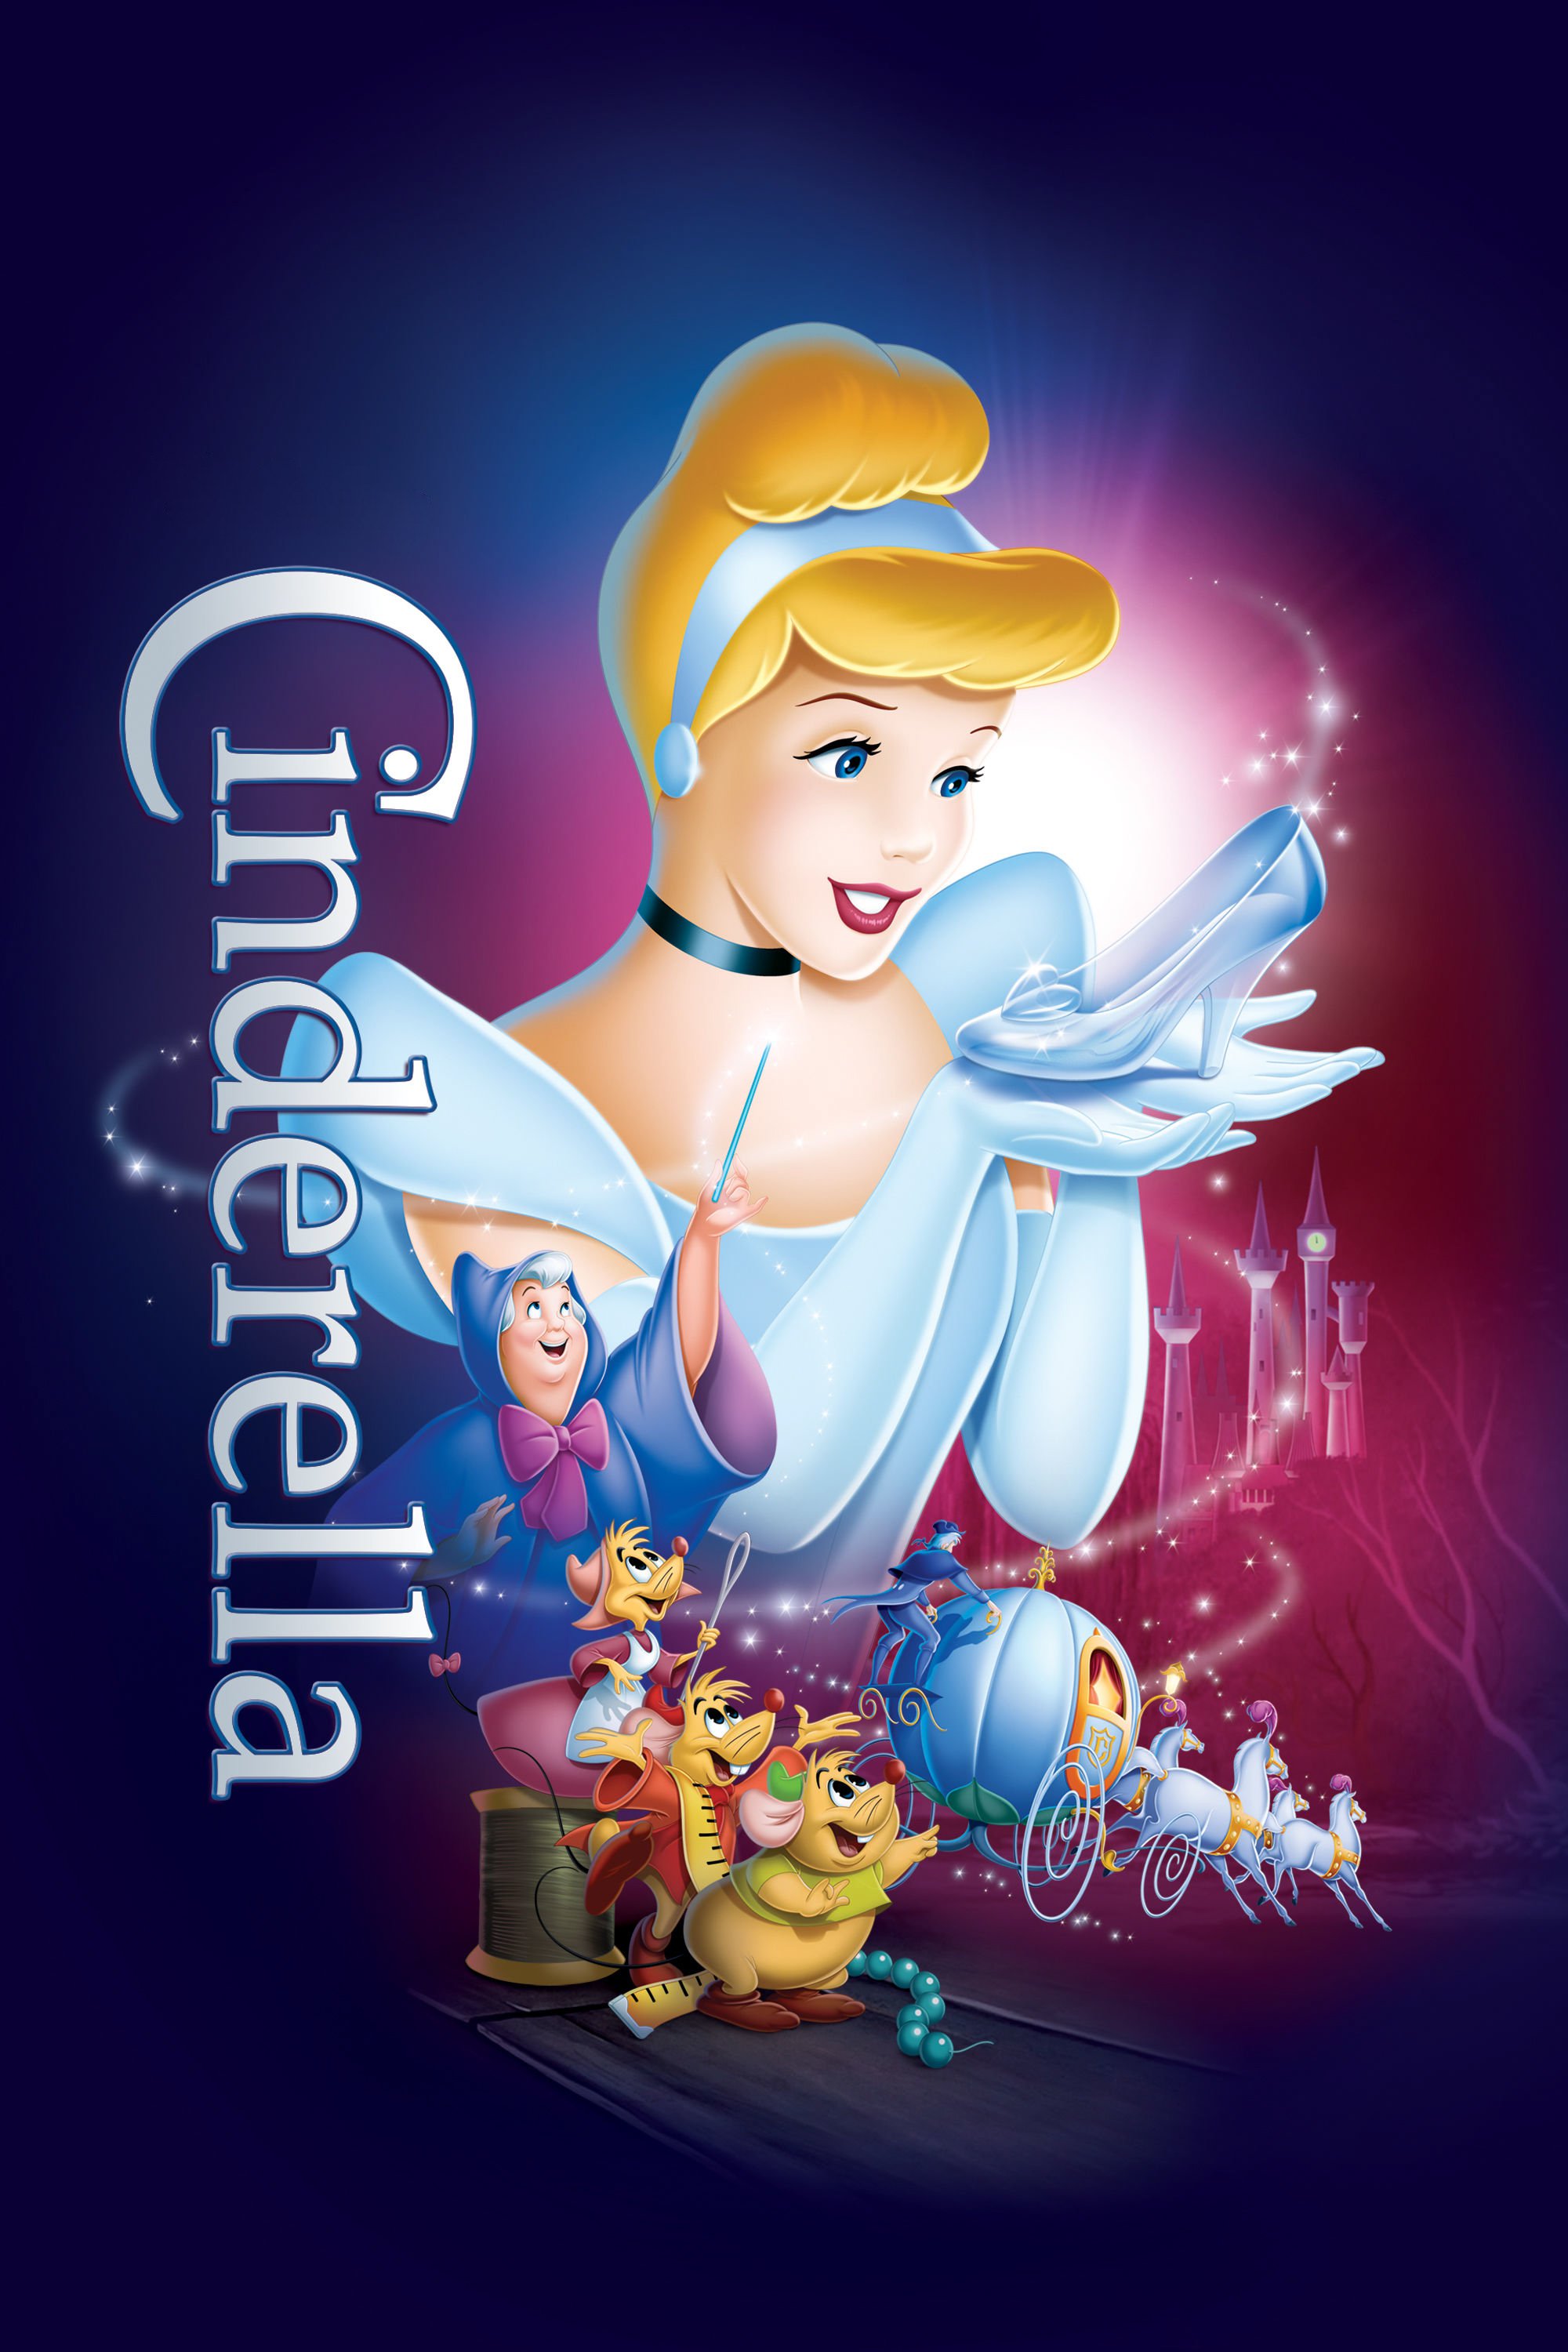 Cinderella (1950) Movie Poster - ID: 147636 - Image Abyss.